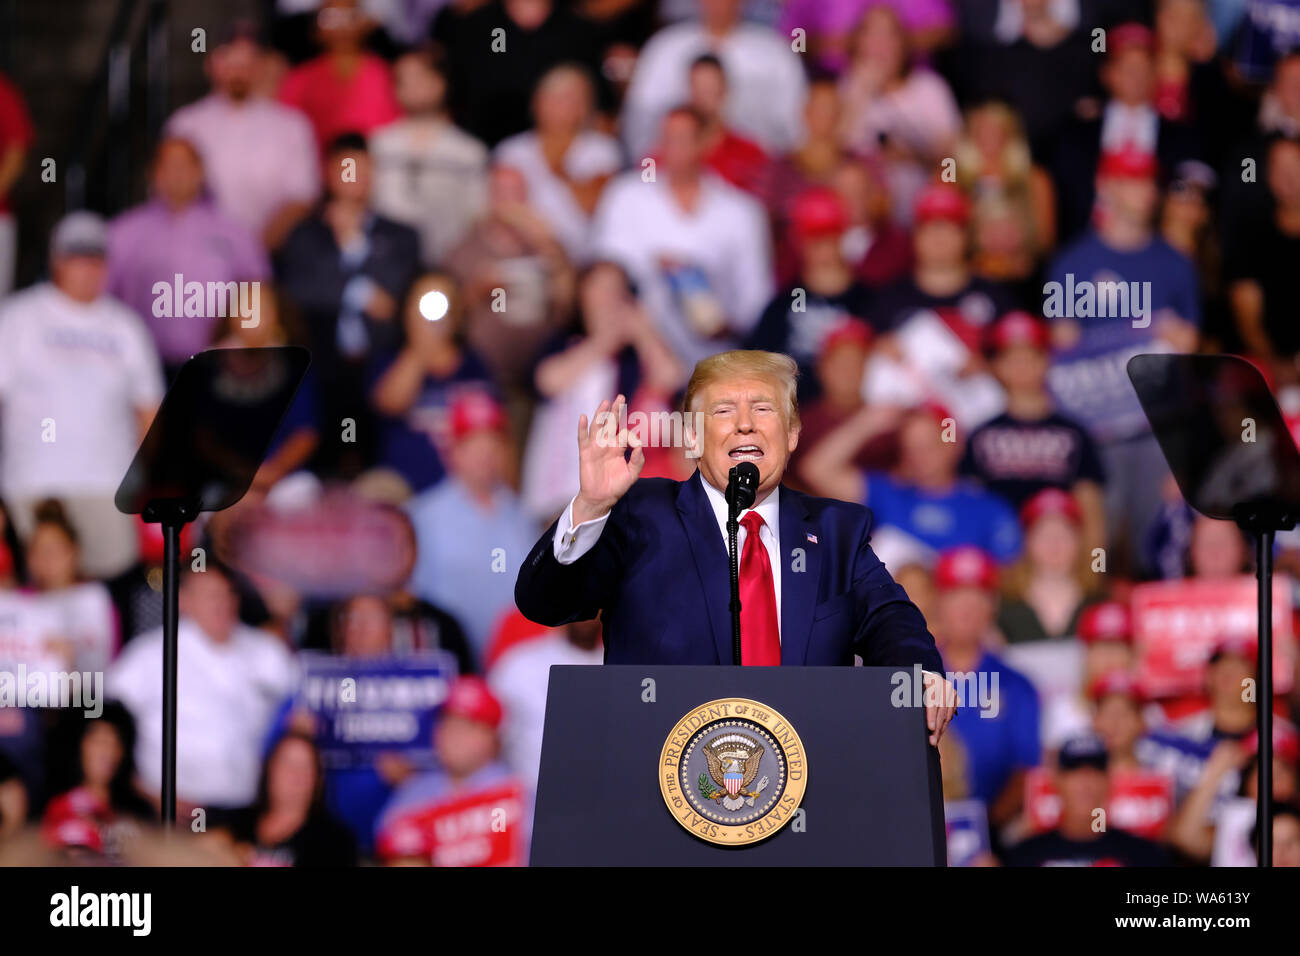 President Donald J. Trump speaks during his campaign for the election next year in Manchester.The current US president is travelling around the country to host rallies for his supports and preparations for the 2020 US presidential election. Stock Photo